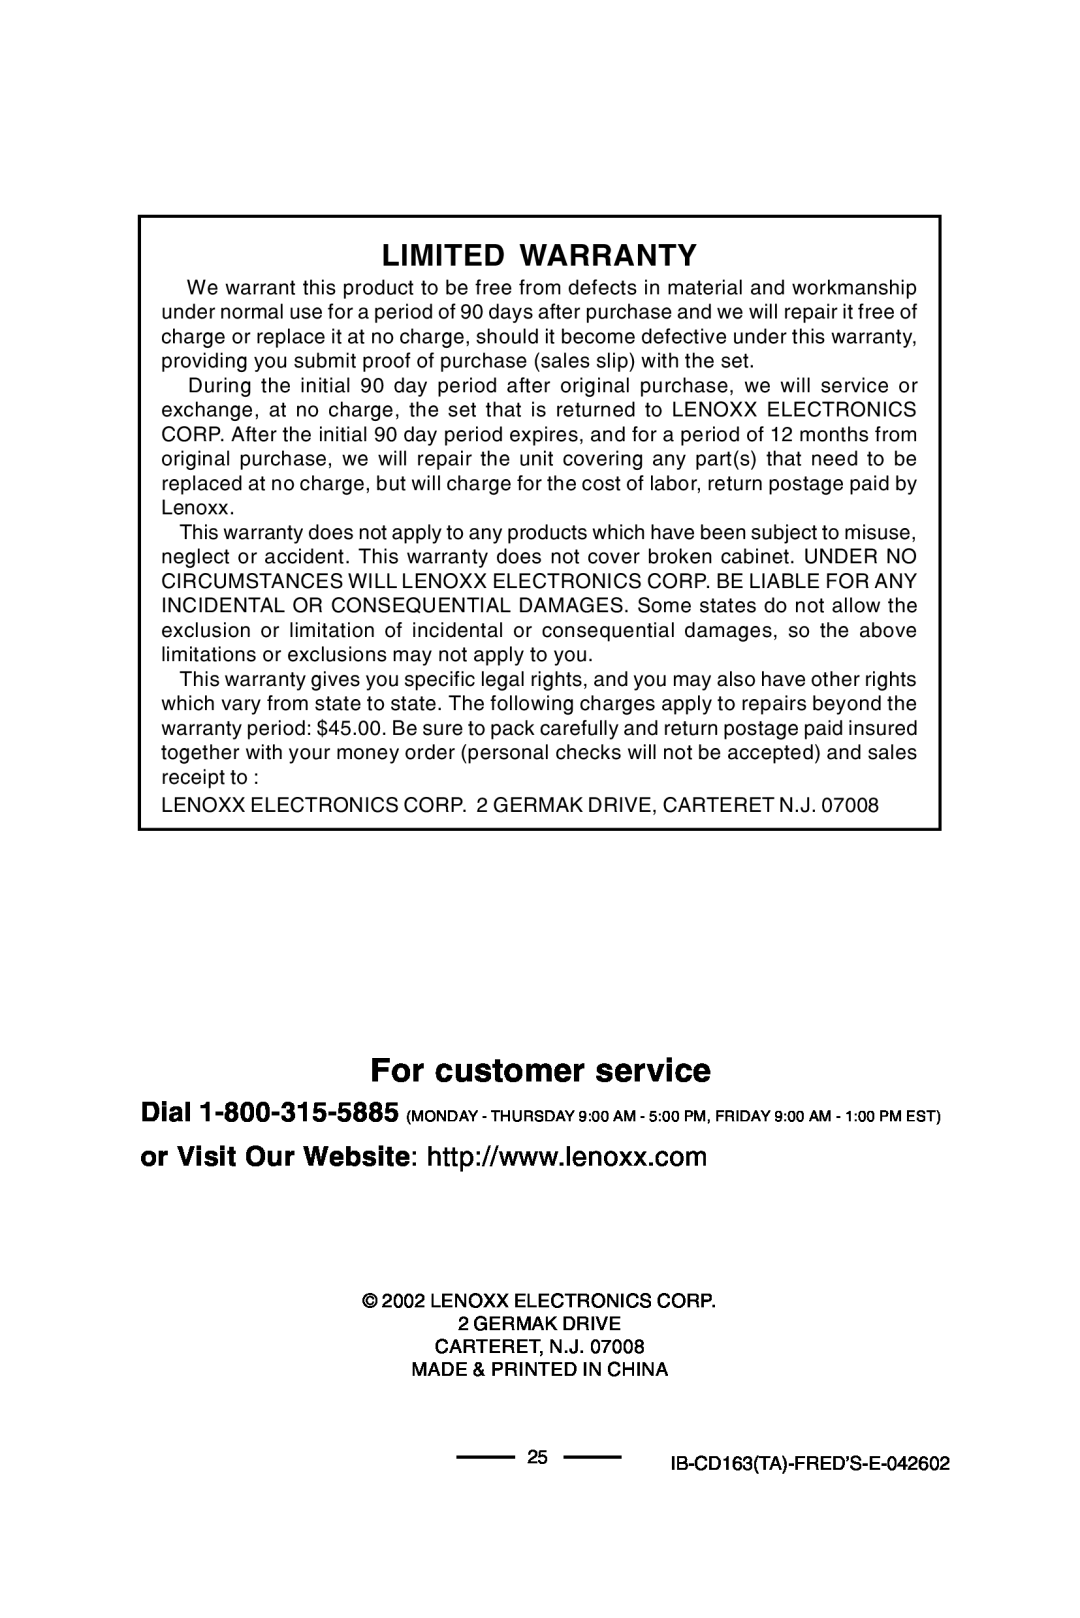 Lenoxx Electronics CD-163 manual For customer service, Limited Warranty 